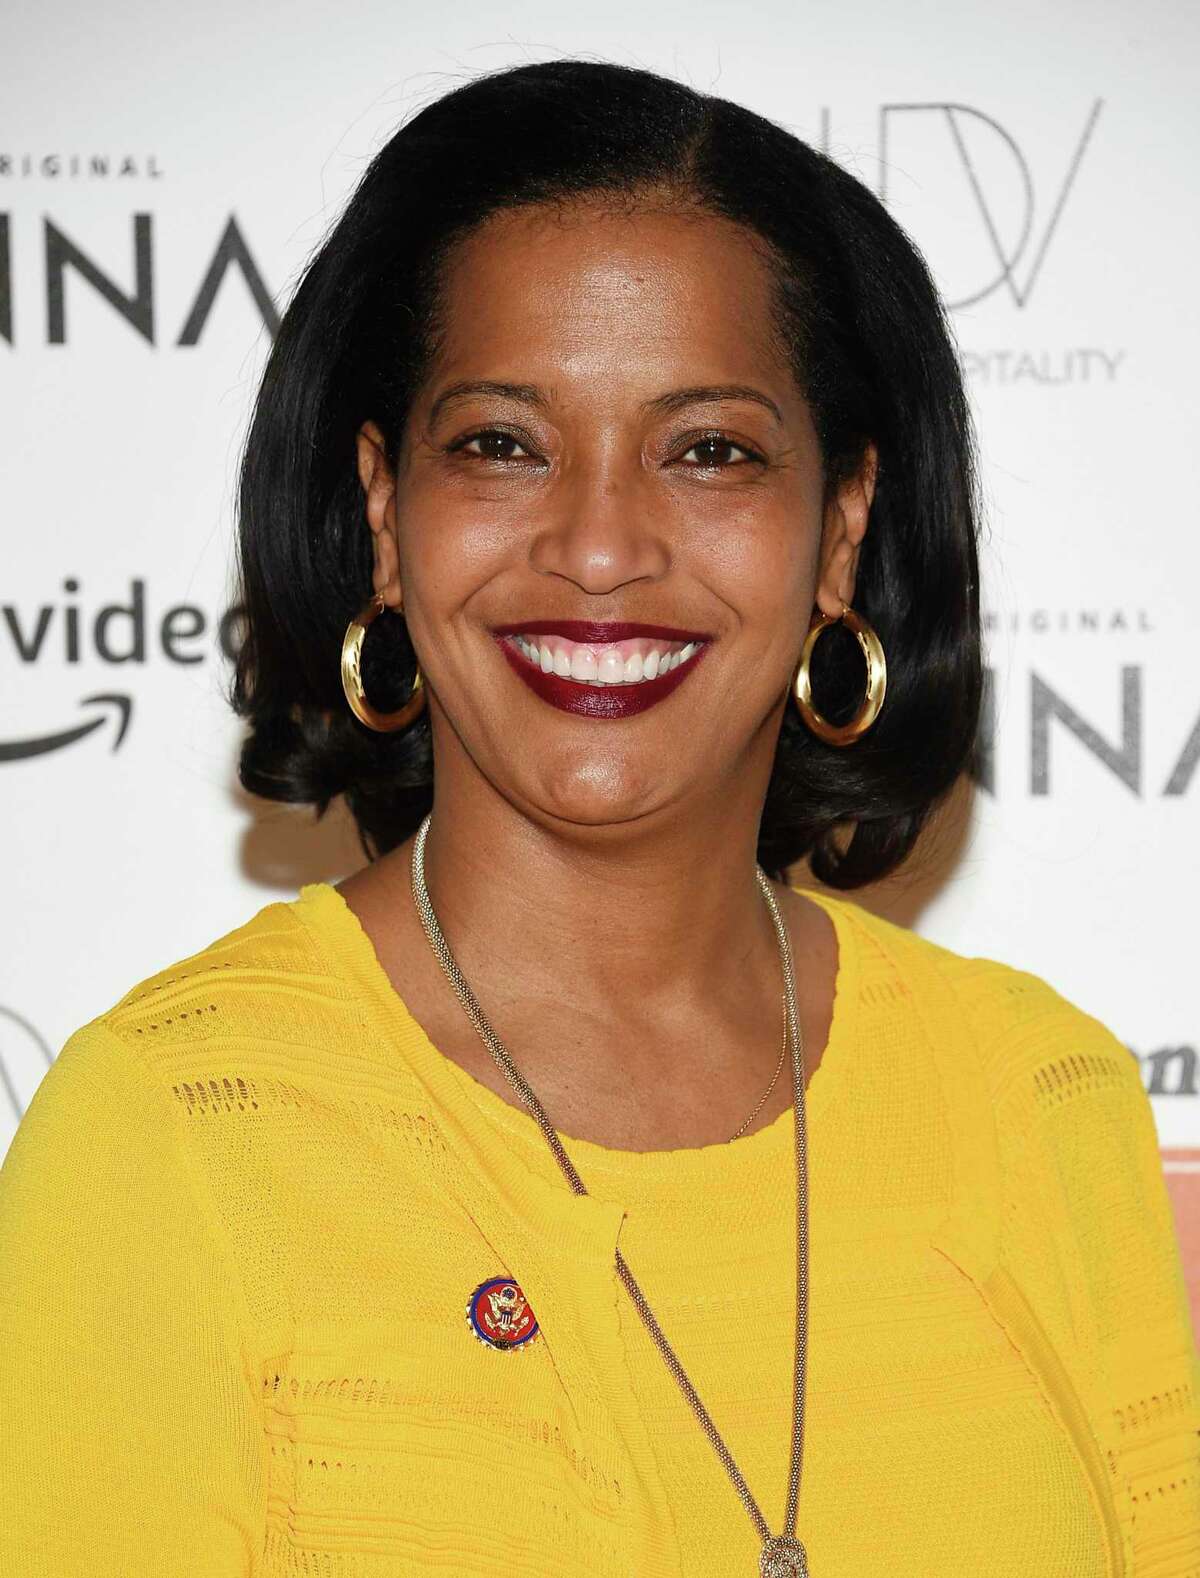 FILE- In this March 20, 2019 file photo, Rep. Jahana Hayes, D-Conn., attends Rolling Stone's Women Shaping the Future brunch in New York. On Saturday, Sept. 19, 2020, Hayes said that she and all of her staff will be quarantining after one of her aides tested positive for the coronavirus. (Photo by Evan Agostini/Invision/AP, File)